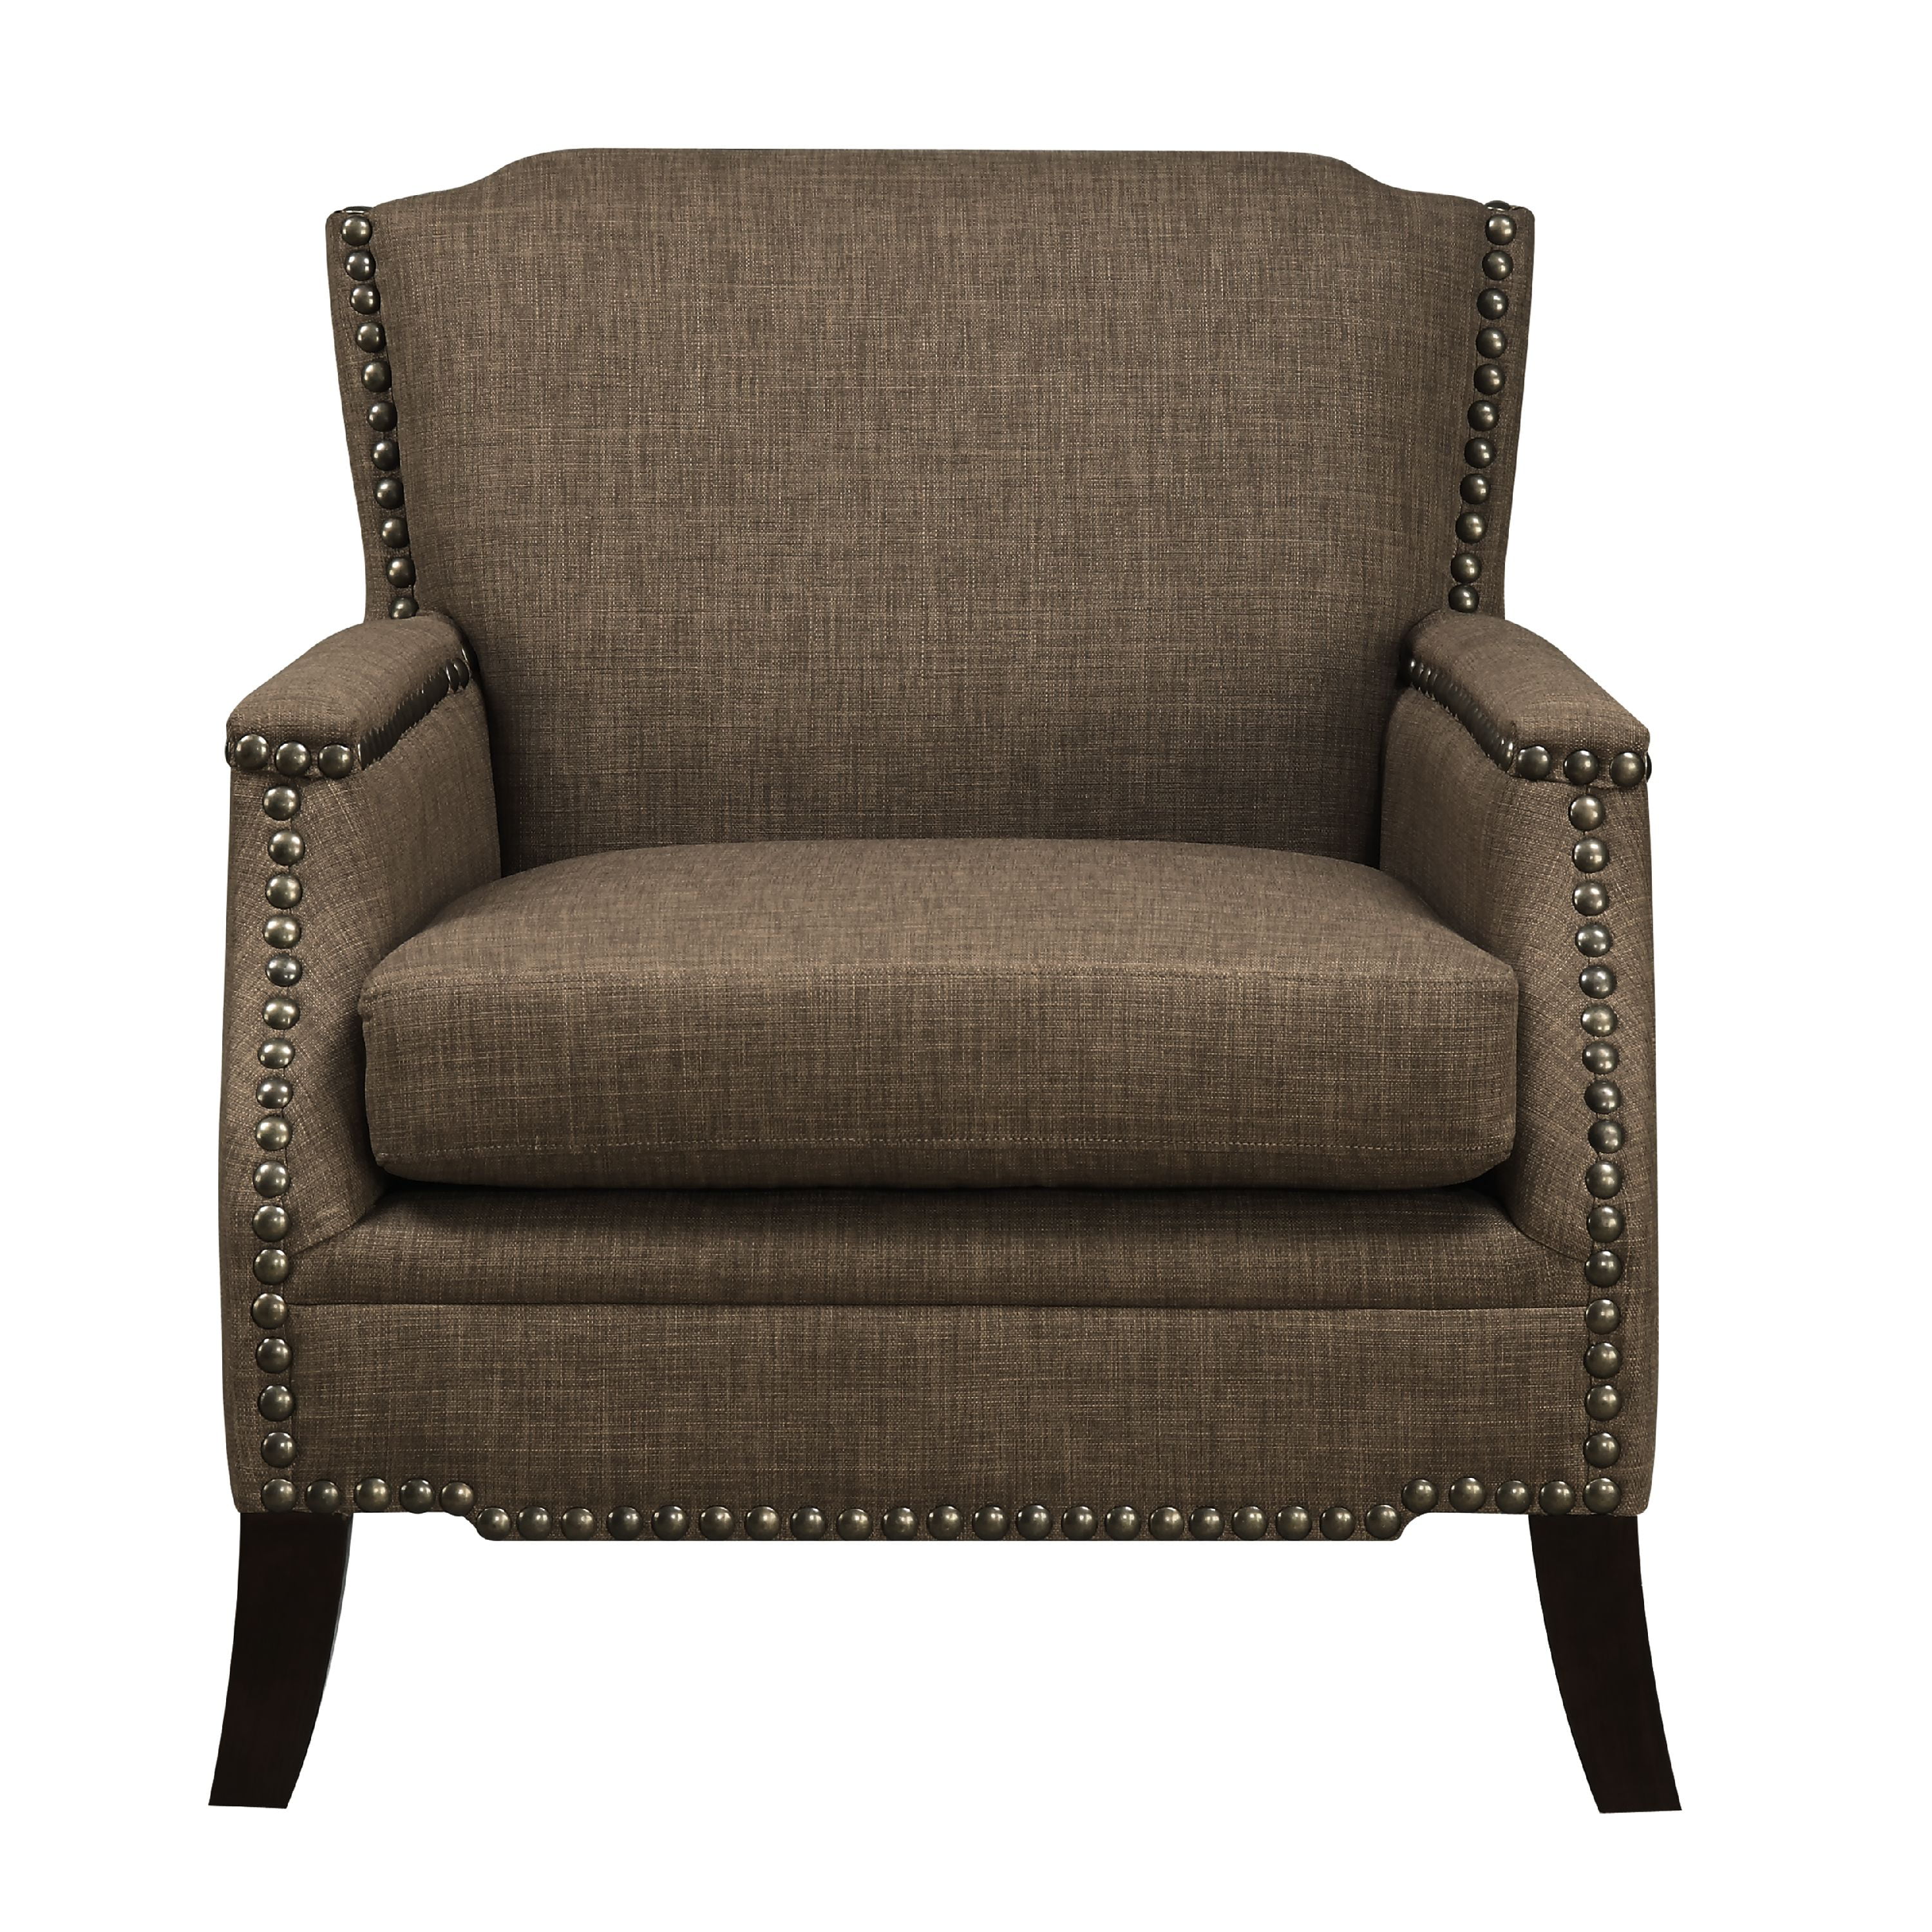 Upholstered Nailhead Trim Accent Arm Chair in Brown - Walmart.com